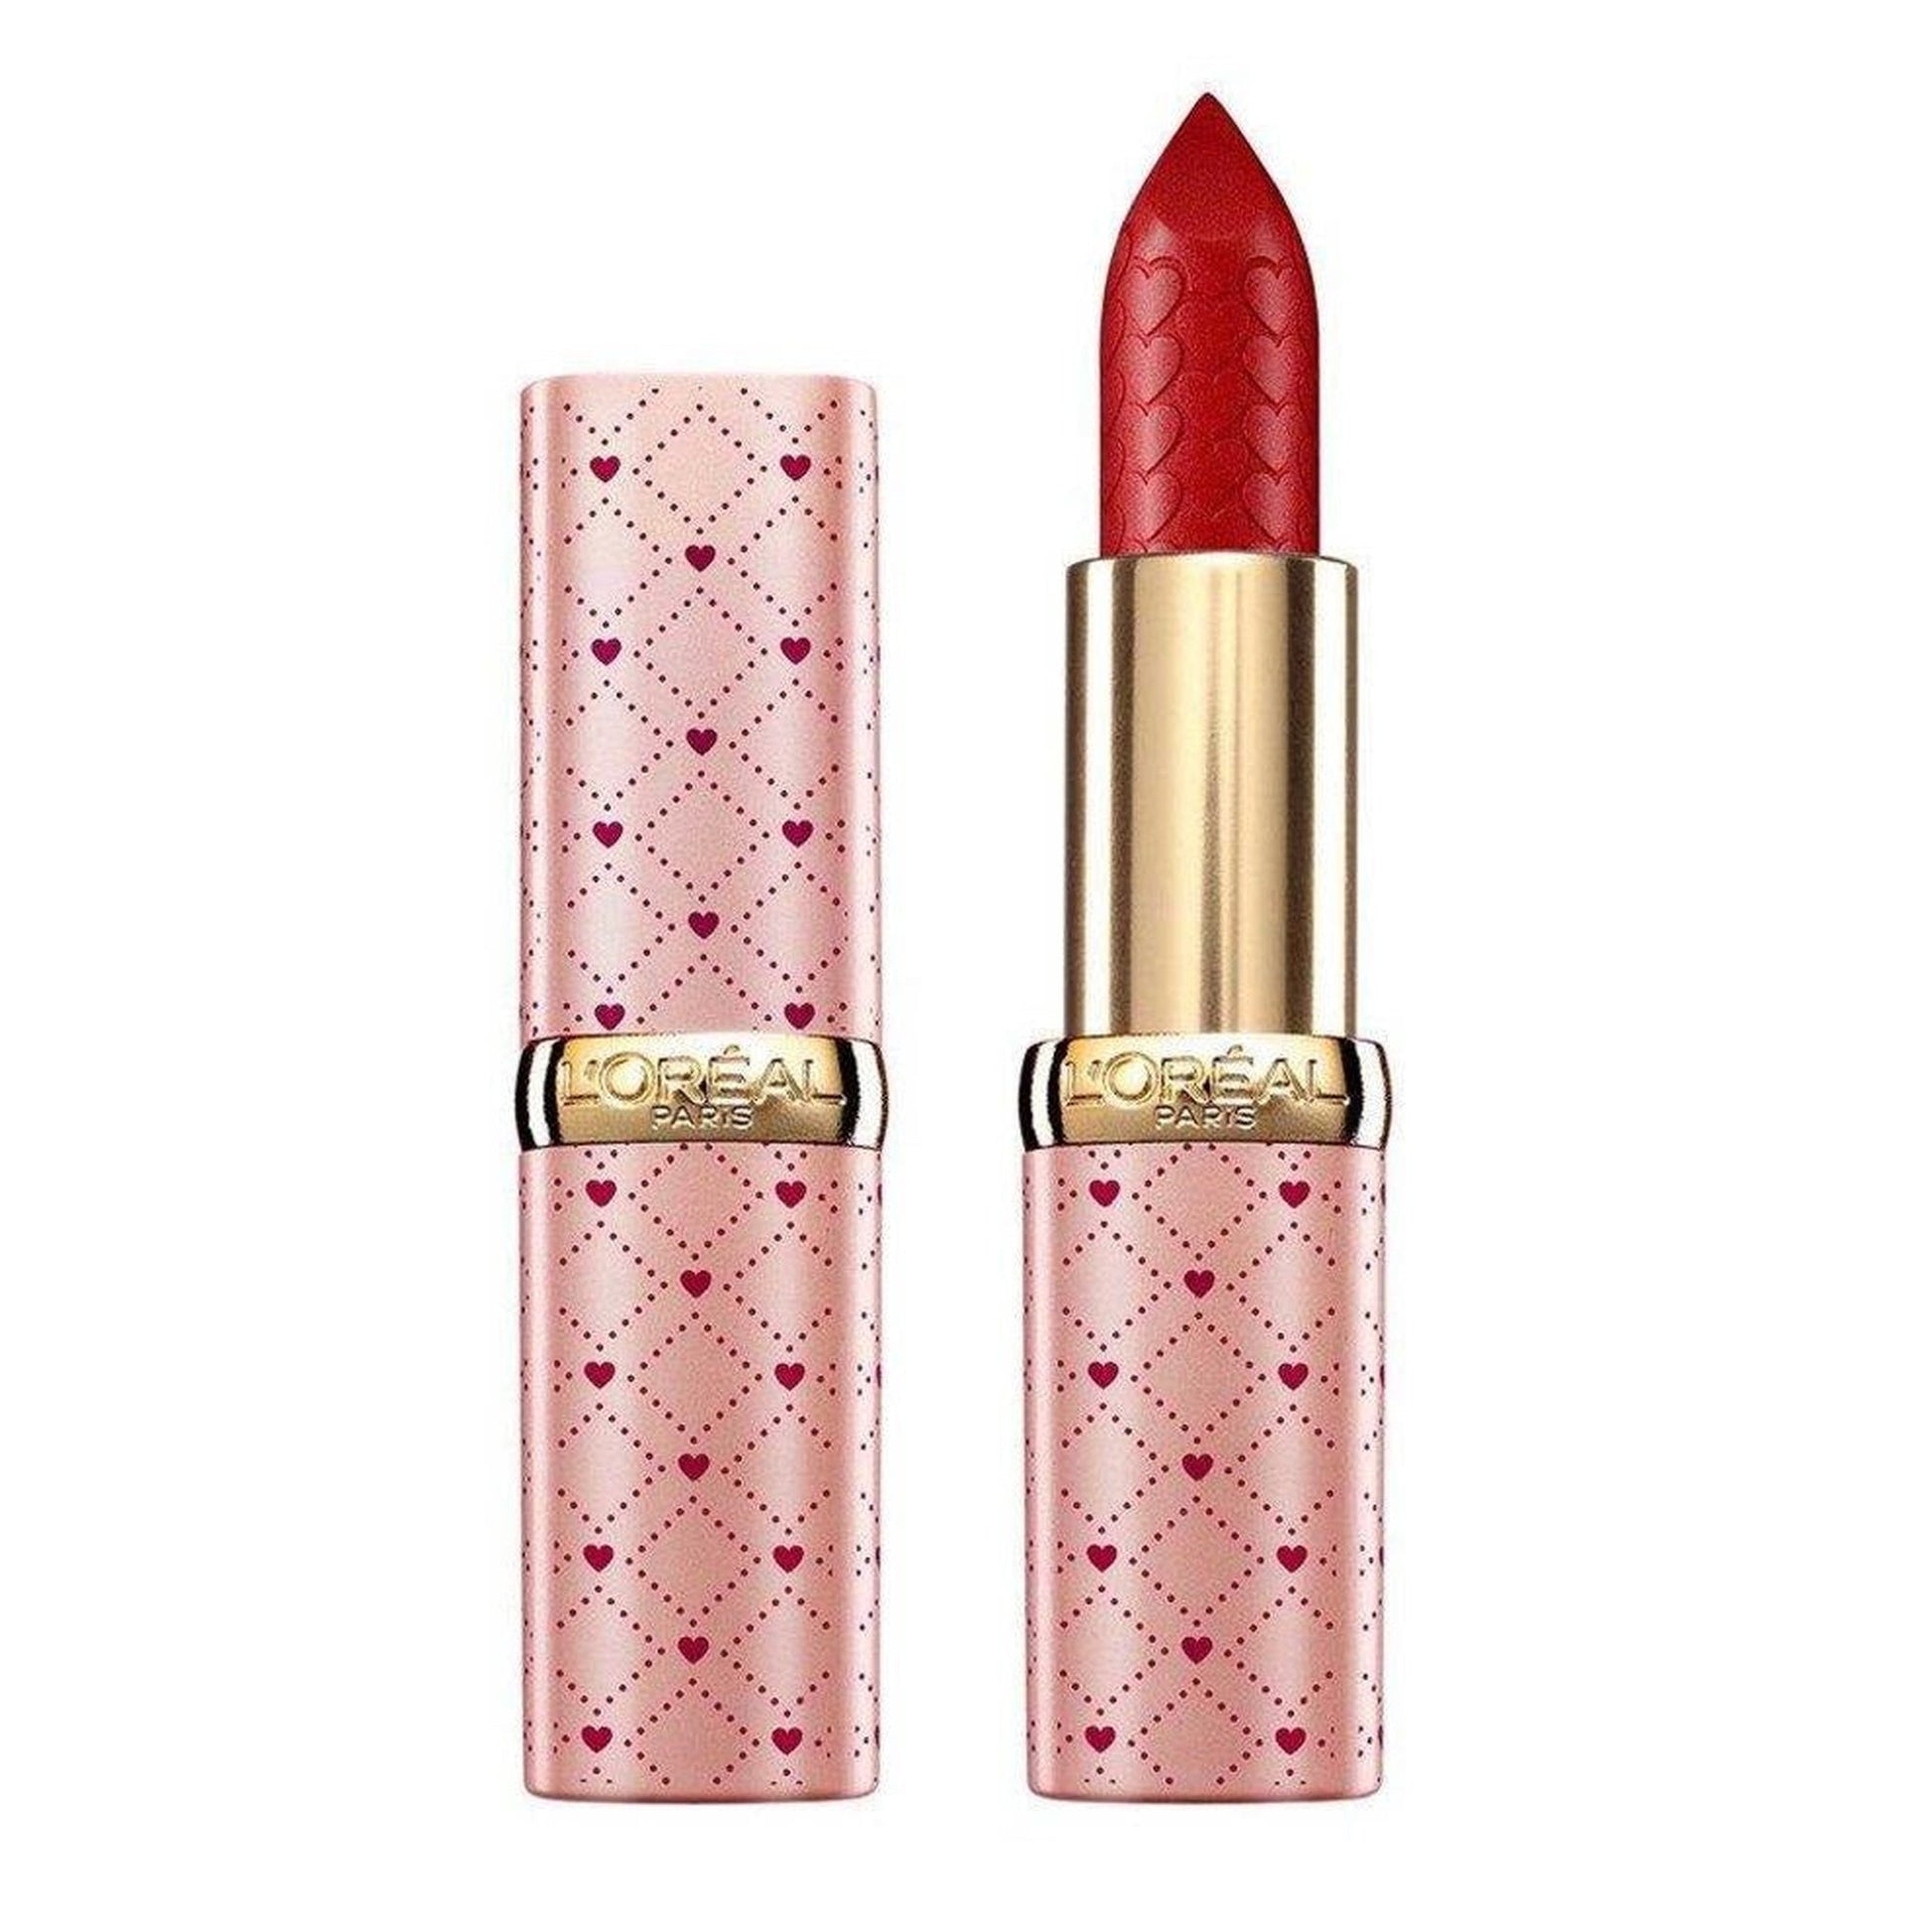 L'Oreal Color Riche Valentines Edition Lipstick 297 Red Passion-L'Oreal-BeautyNmakeup.co.uk